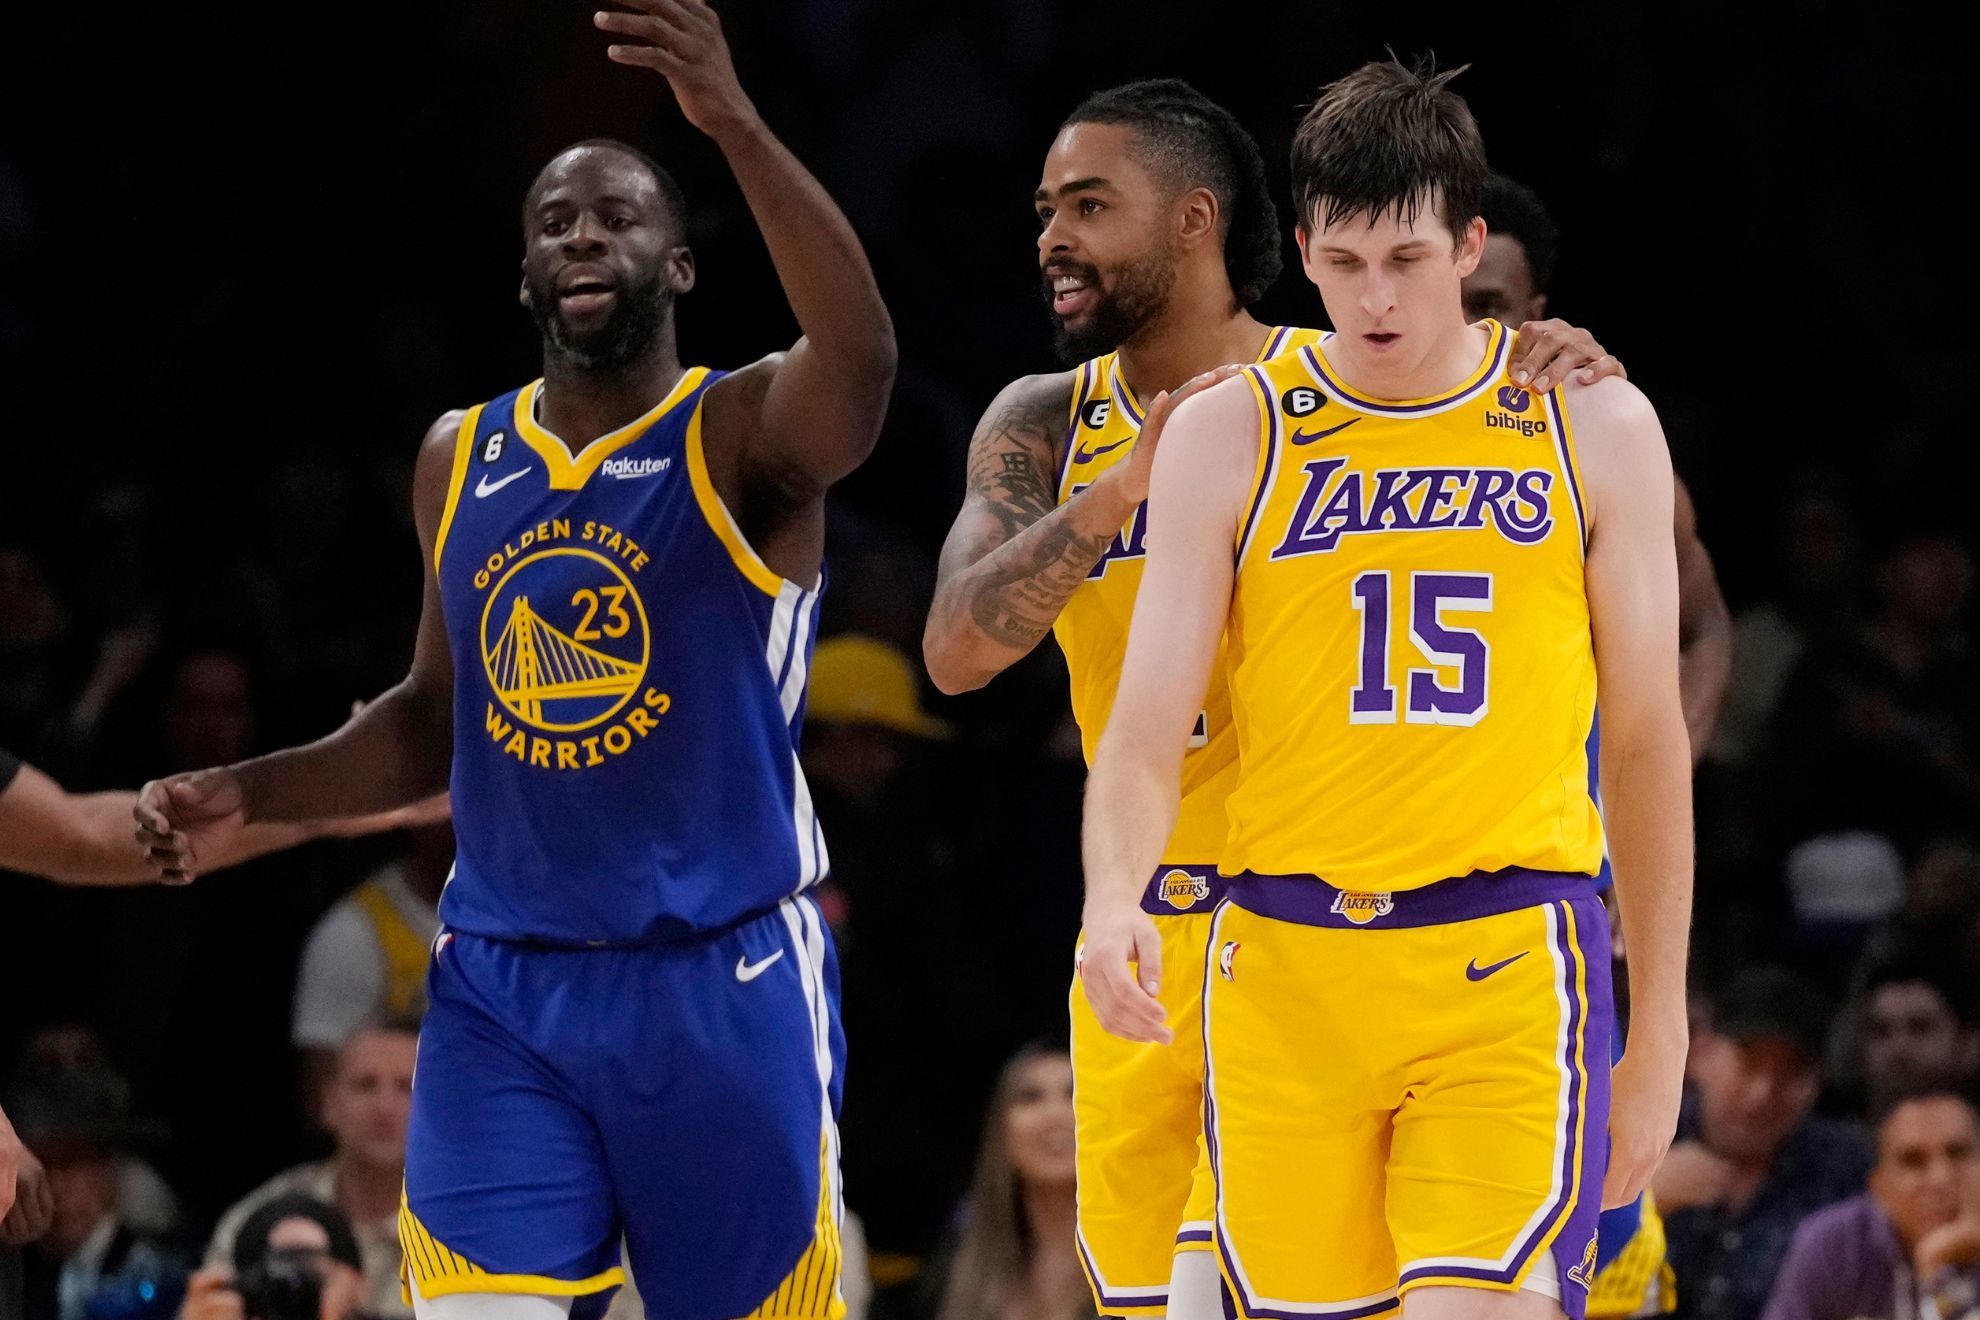 Warriors visit Lakers at Crypto.com Arena in Game 6 of West semis